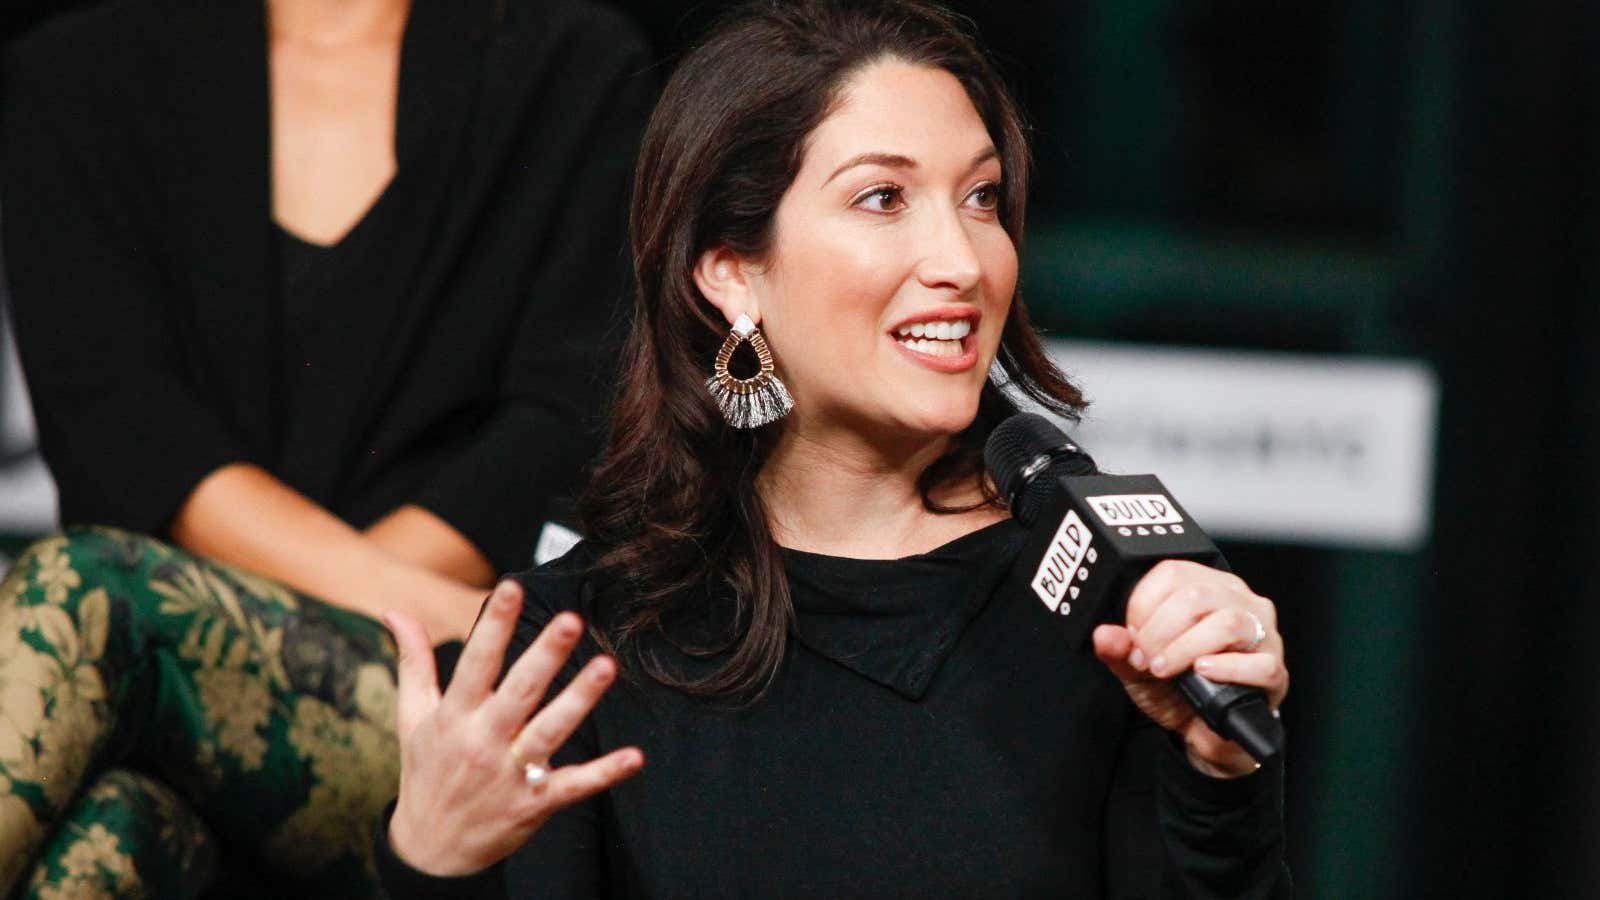 Randi Zuckerberg knows what it’s like to be the only woman in the room.